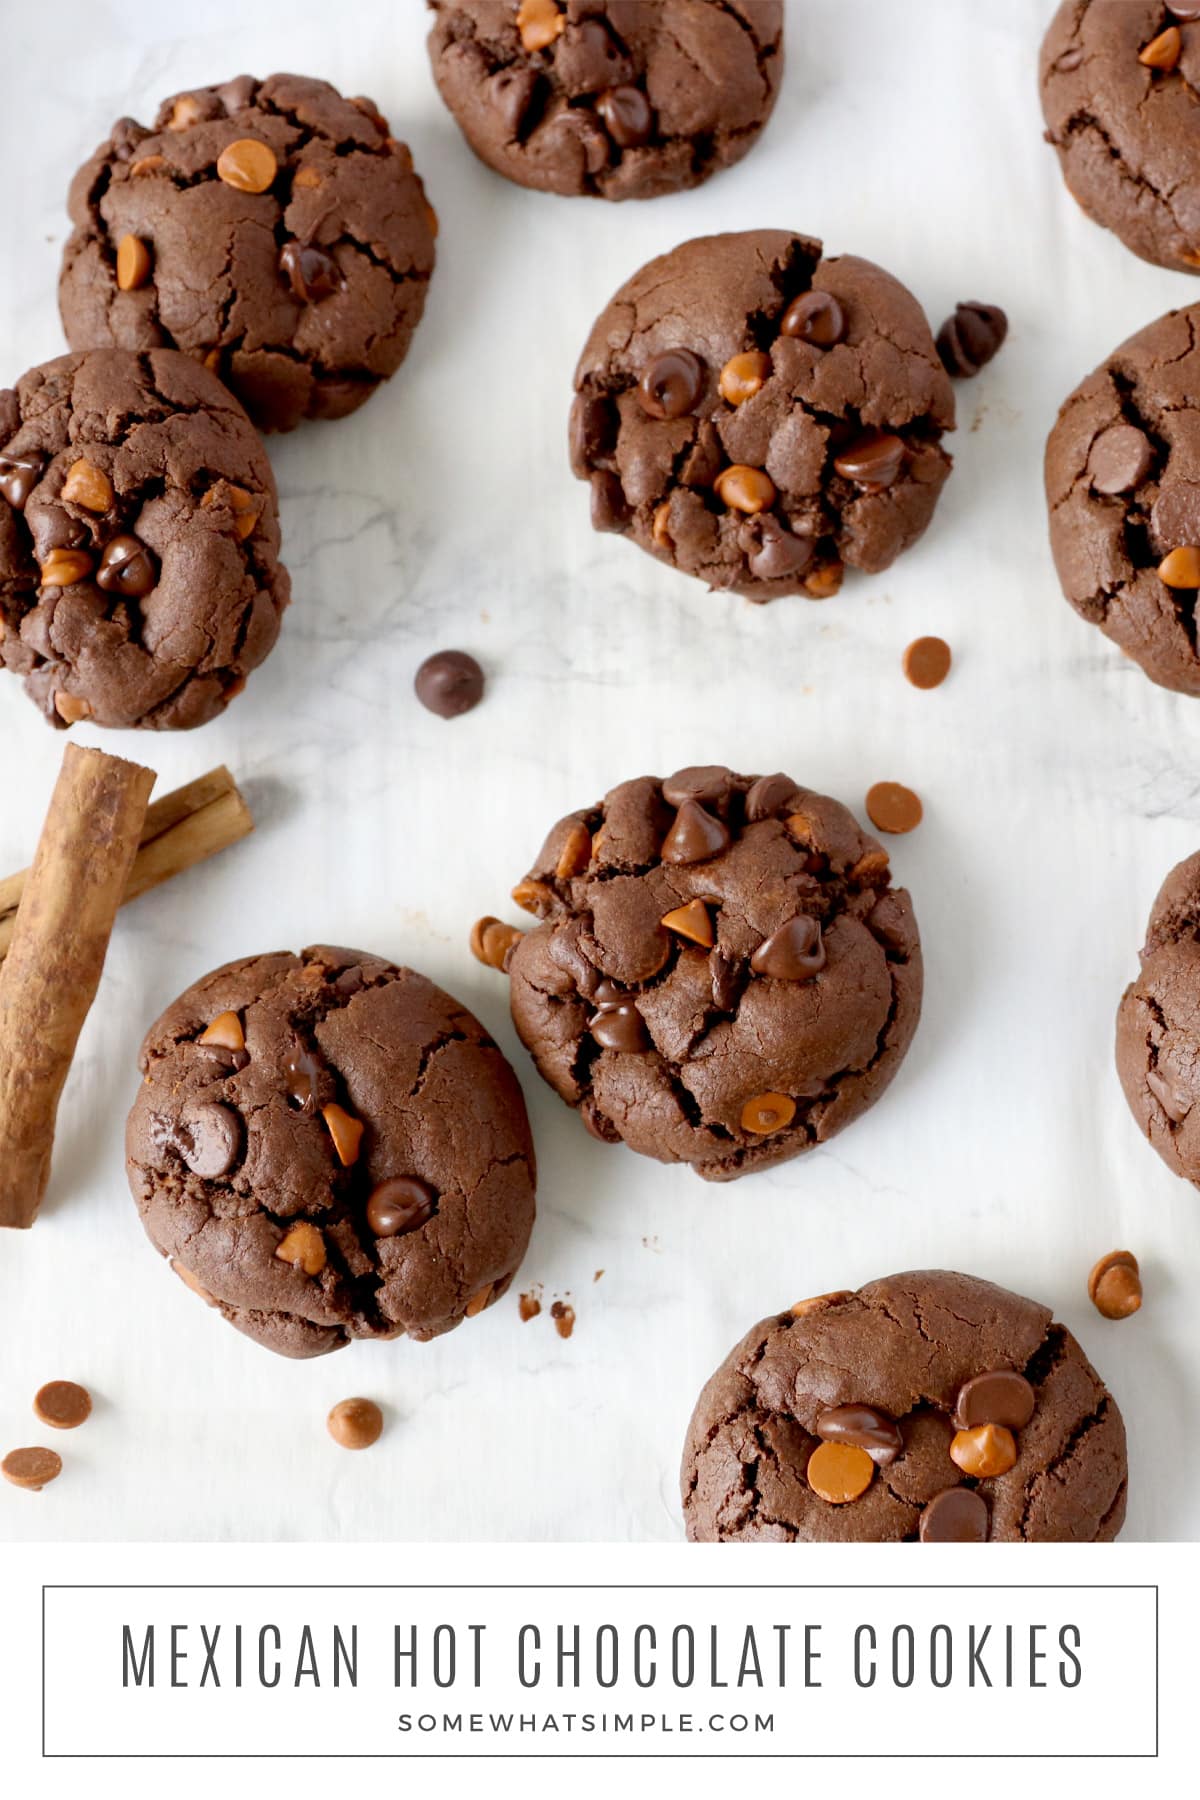 Mexican Hot Chocolate Cookies are soft, warm, and perfectly spiced with cinnamon and cayenne pepper. These delicious chocolate cookies taste amazing and are so simple to make! via @somewhatsimple